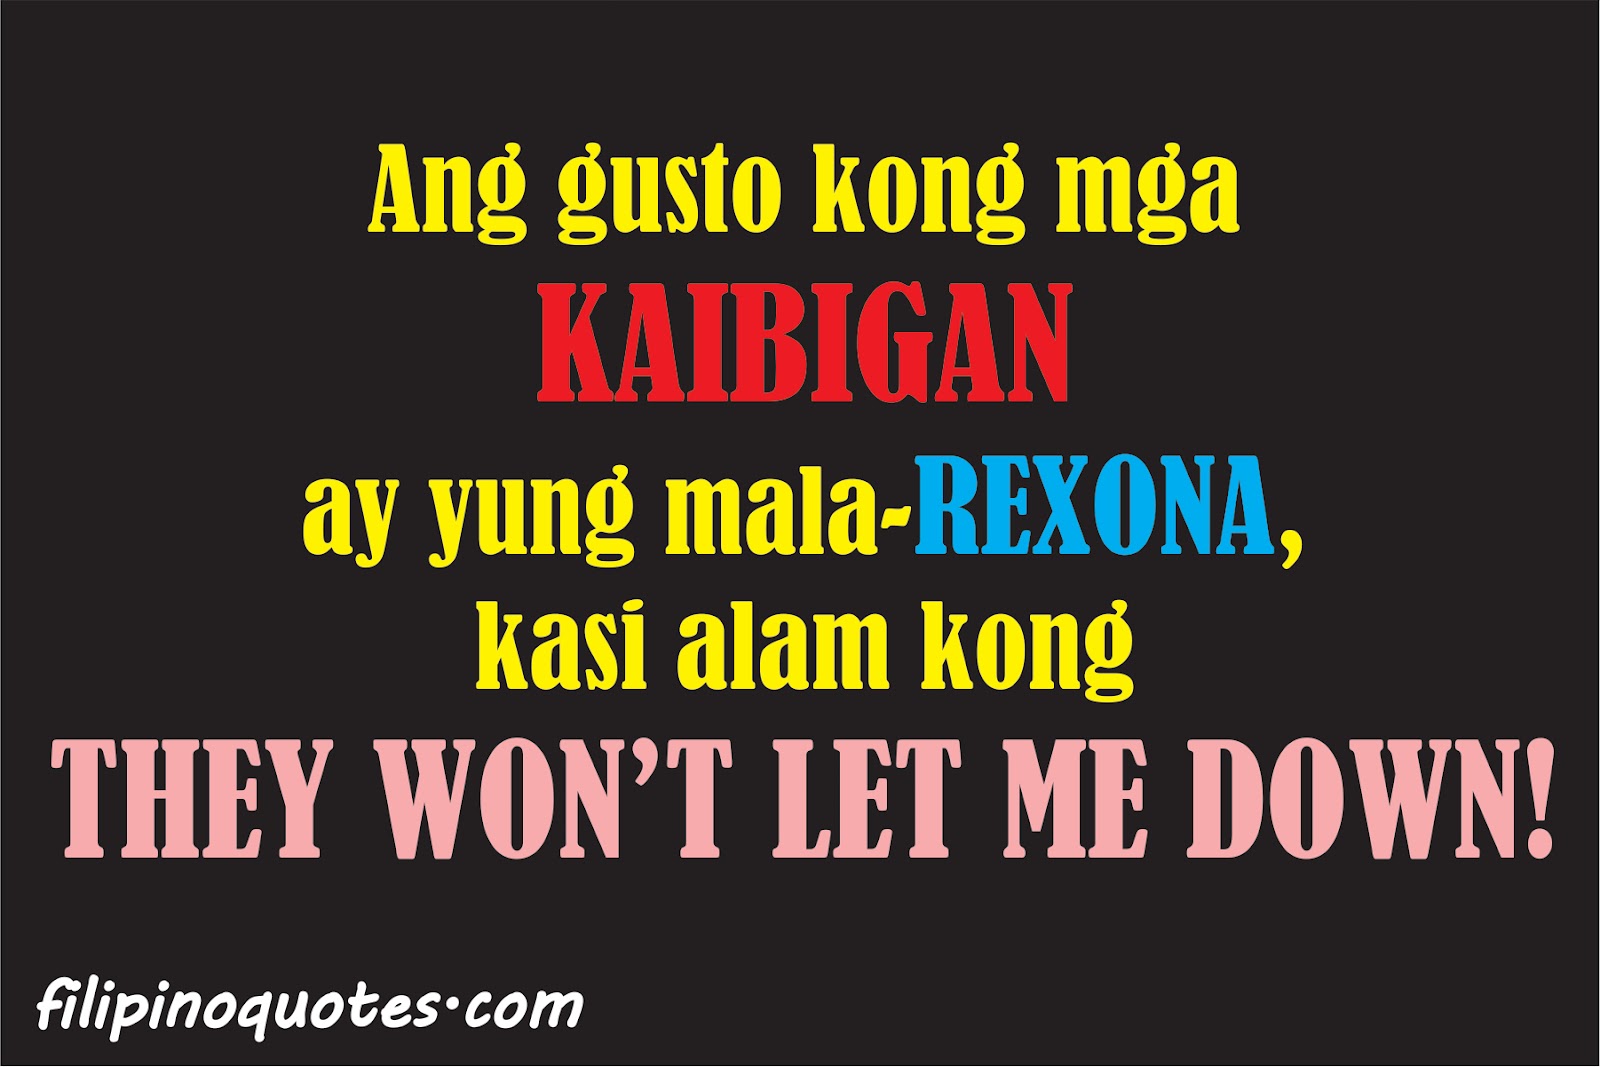 Quotes About Friendship Memories Tagalog Wallpaper imba